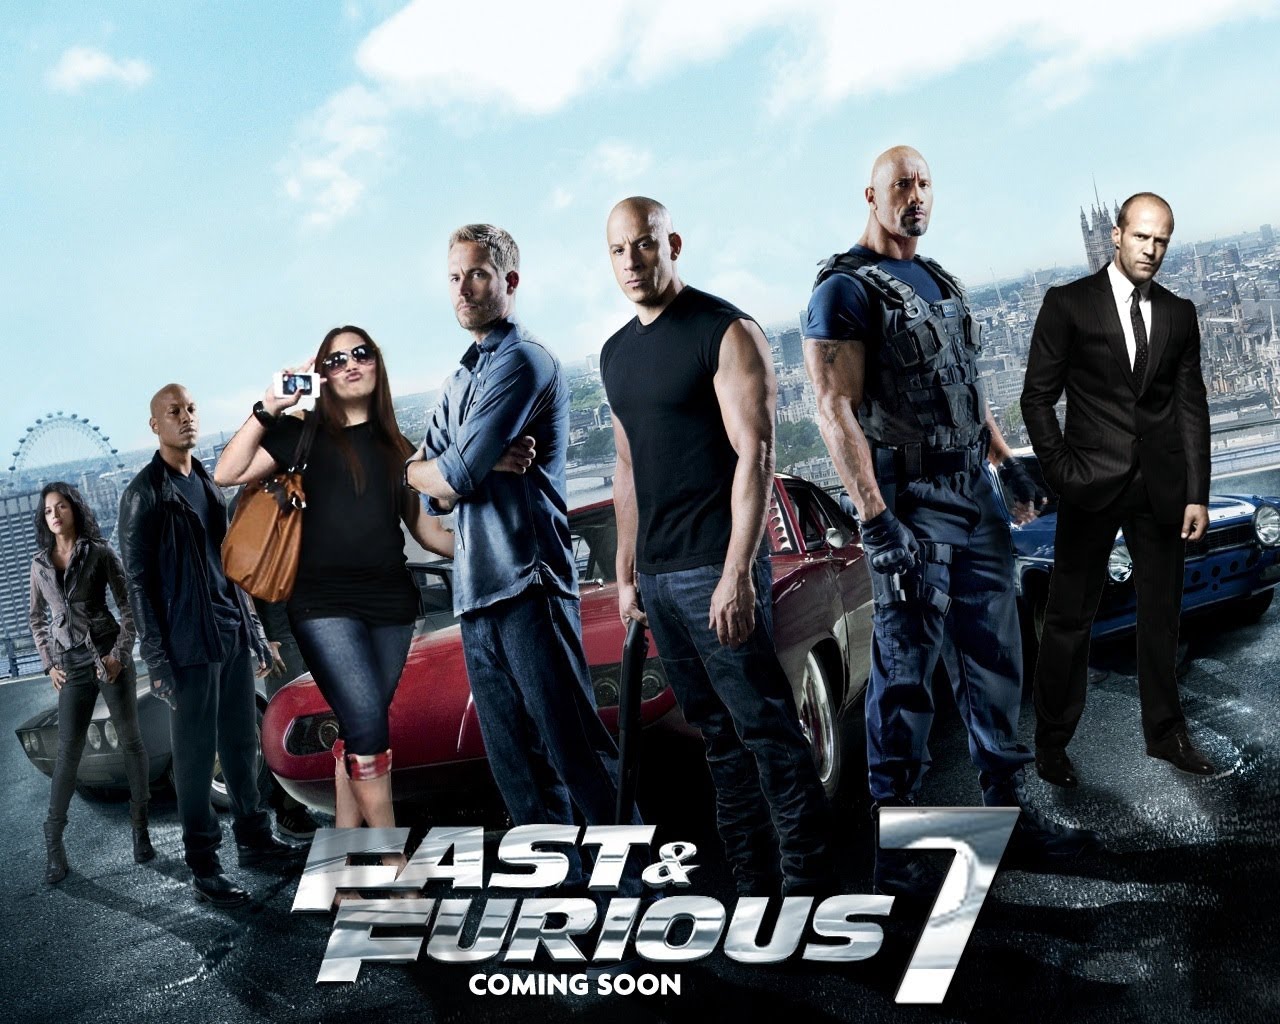 Fast and Furious 7 (2015) Tamil Dubbed Movie HD 720p Watch Online (EXTENDED)